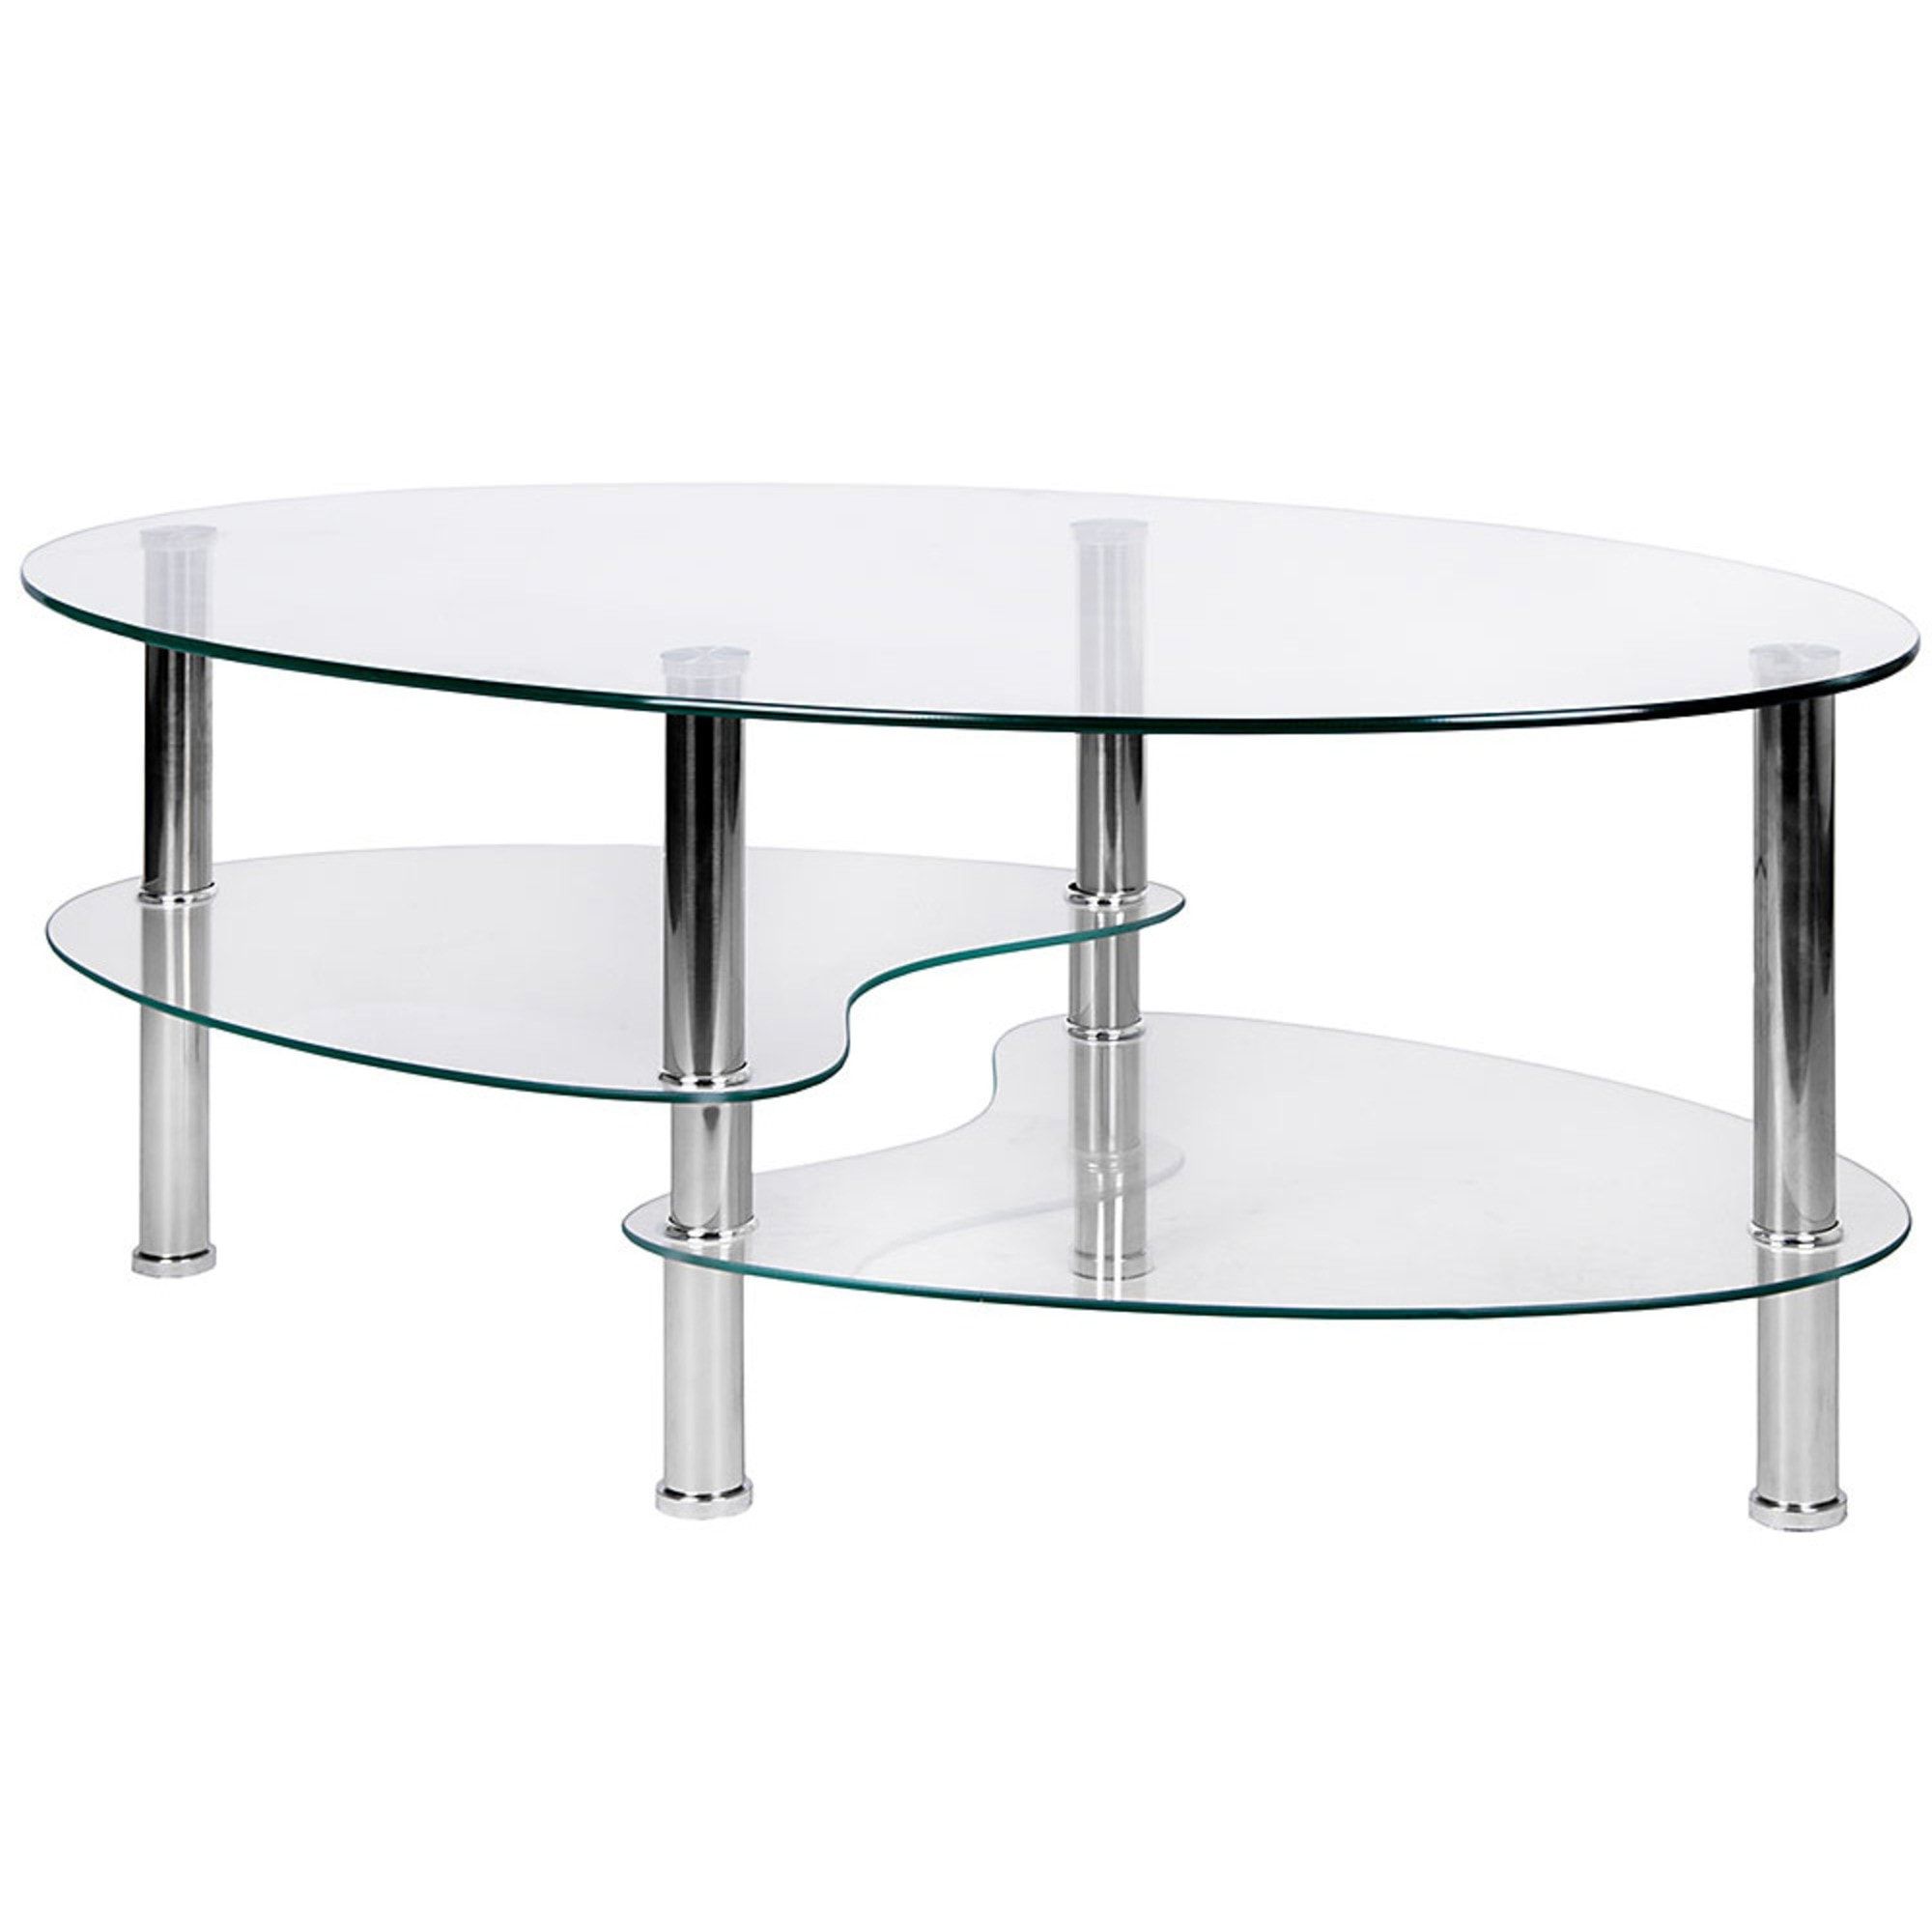 Oval Glass Coffee Tables Regarding Most Recently Released Cara Oval Clear Glass Coffee Table (View 2 of 10)